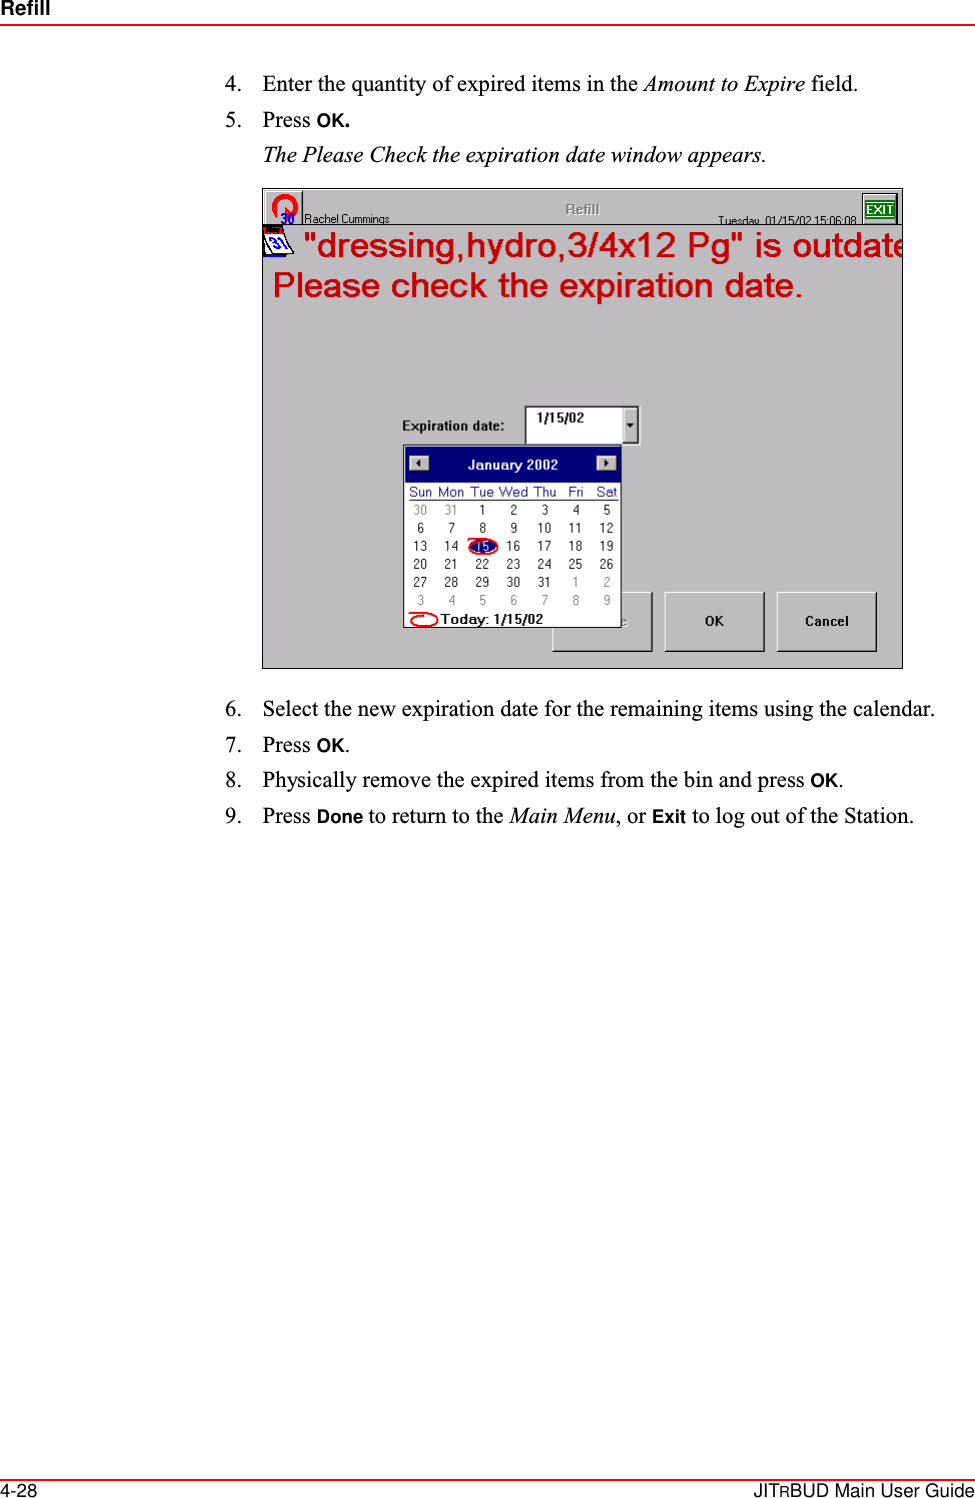 Refill4-28 JITRBUD Main User Guide4. Enter the quantity of expired items in the Amount to Expire field.5. Press OK.The Please Check the expiration date window appears. 6. Select the new expiration date for the remaining items using the calendar.7. Press OK.8. Physically remove the expired items from the bin and press OK.9. Press Done to return to the Main Menu, or Exit to log out of the Station.